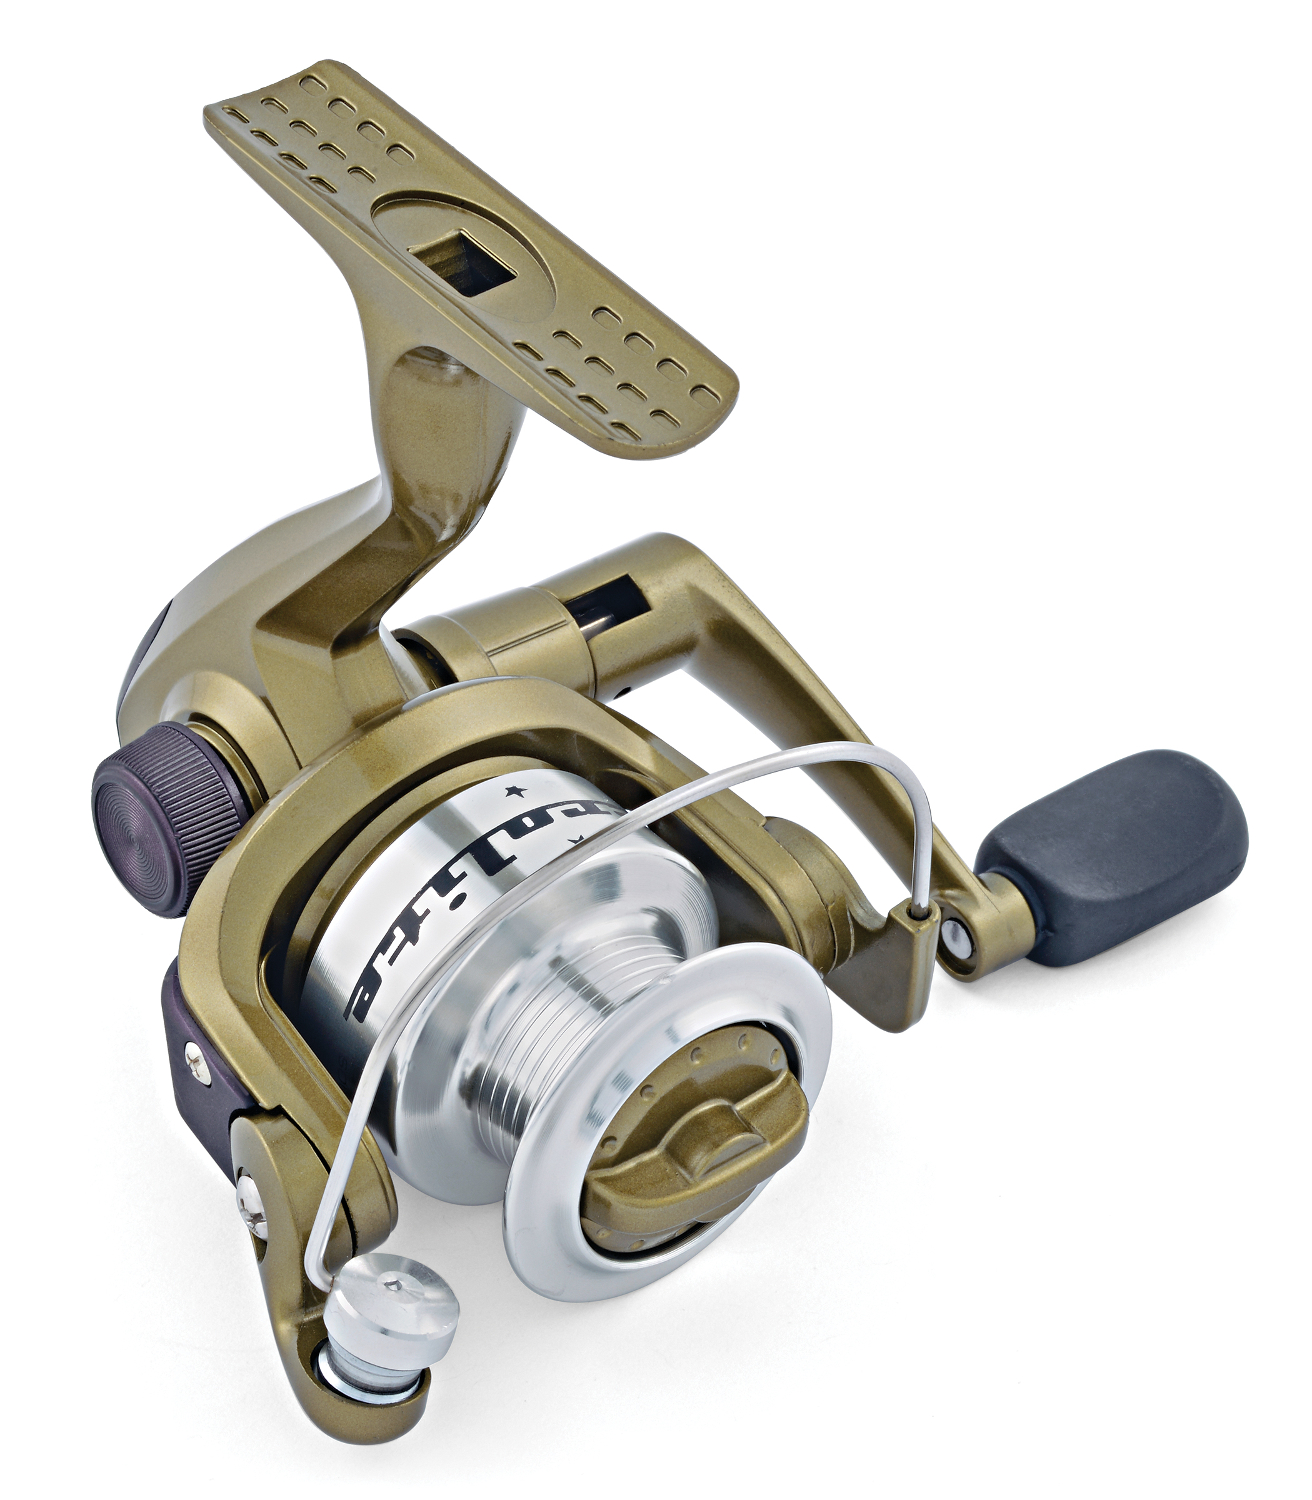 South Bend Microlite Spinning Reel - Size 10